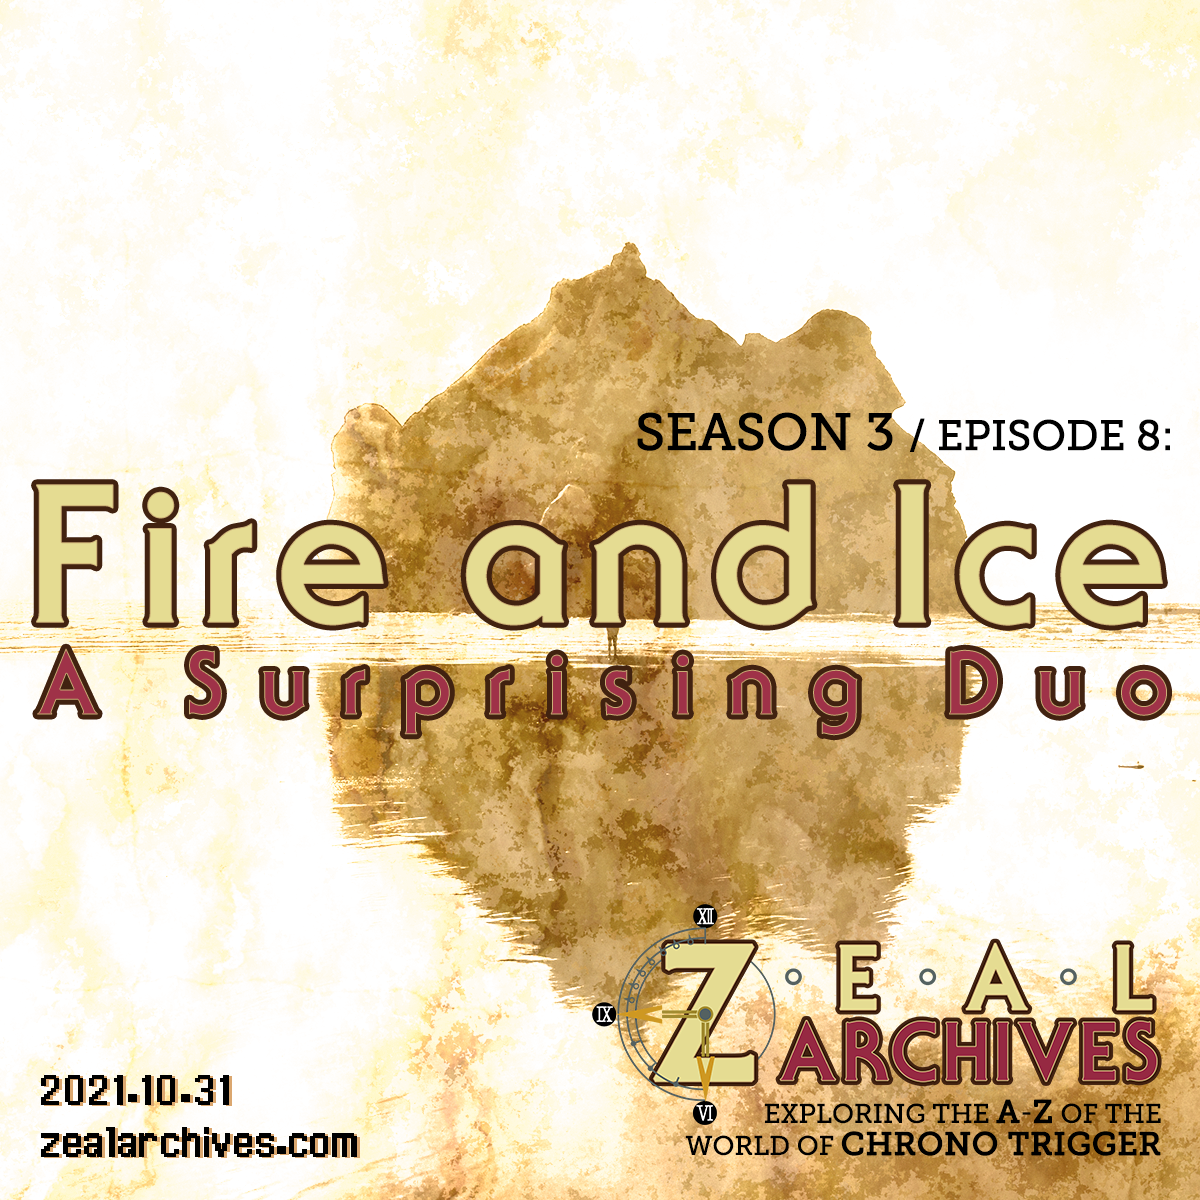 Fire and Ice: A Surprising Duo [Book 3, Chapter 8]